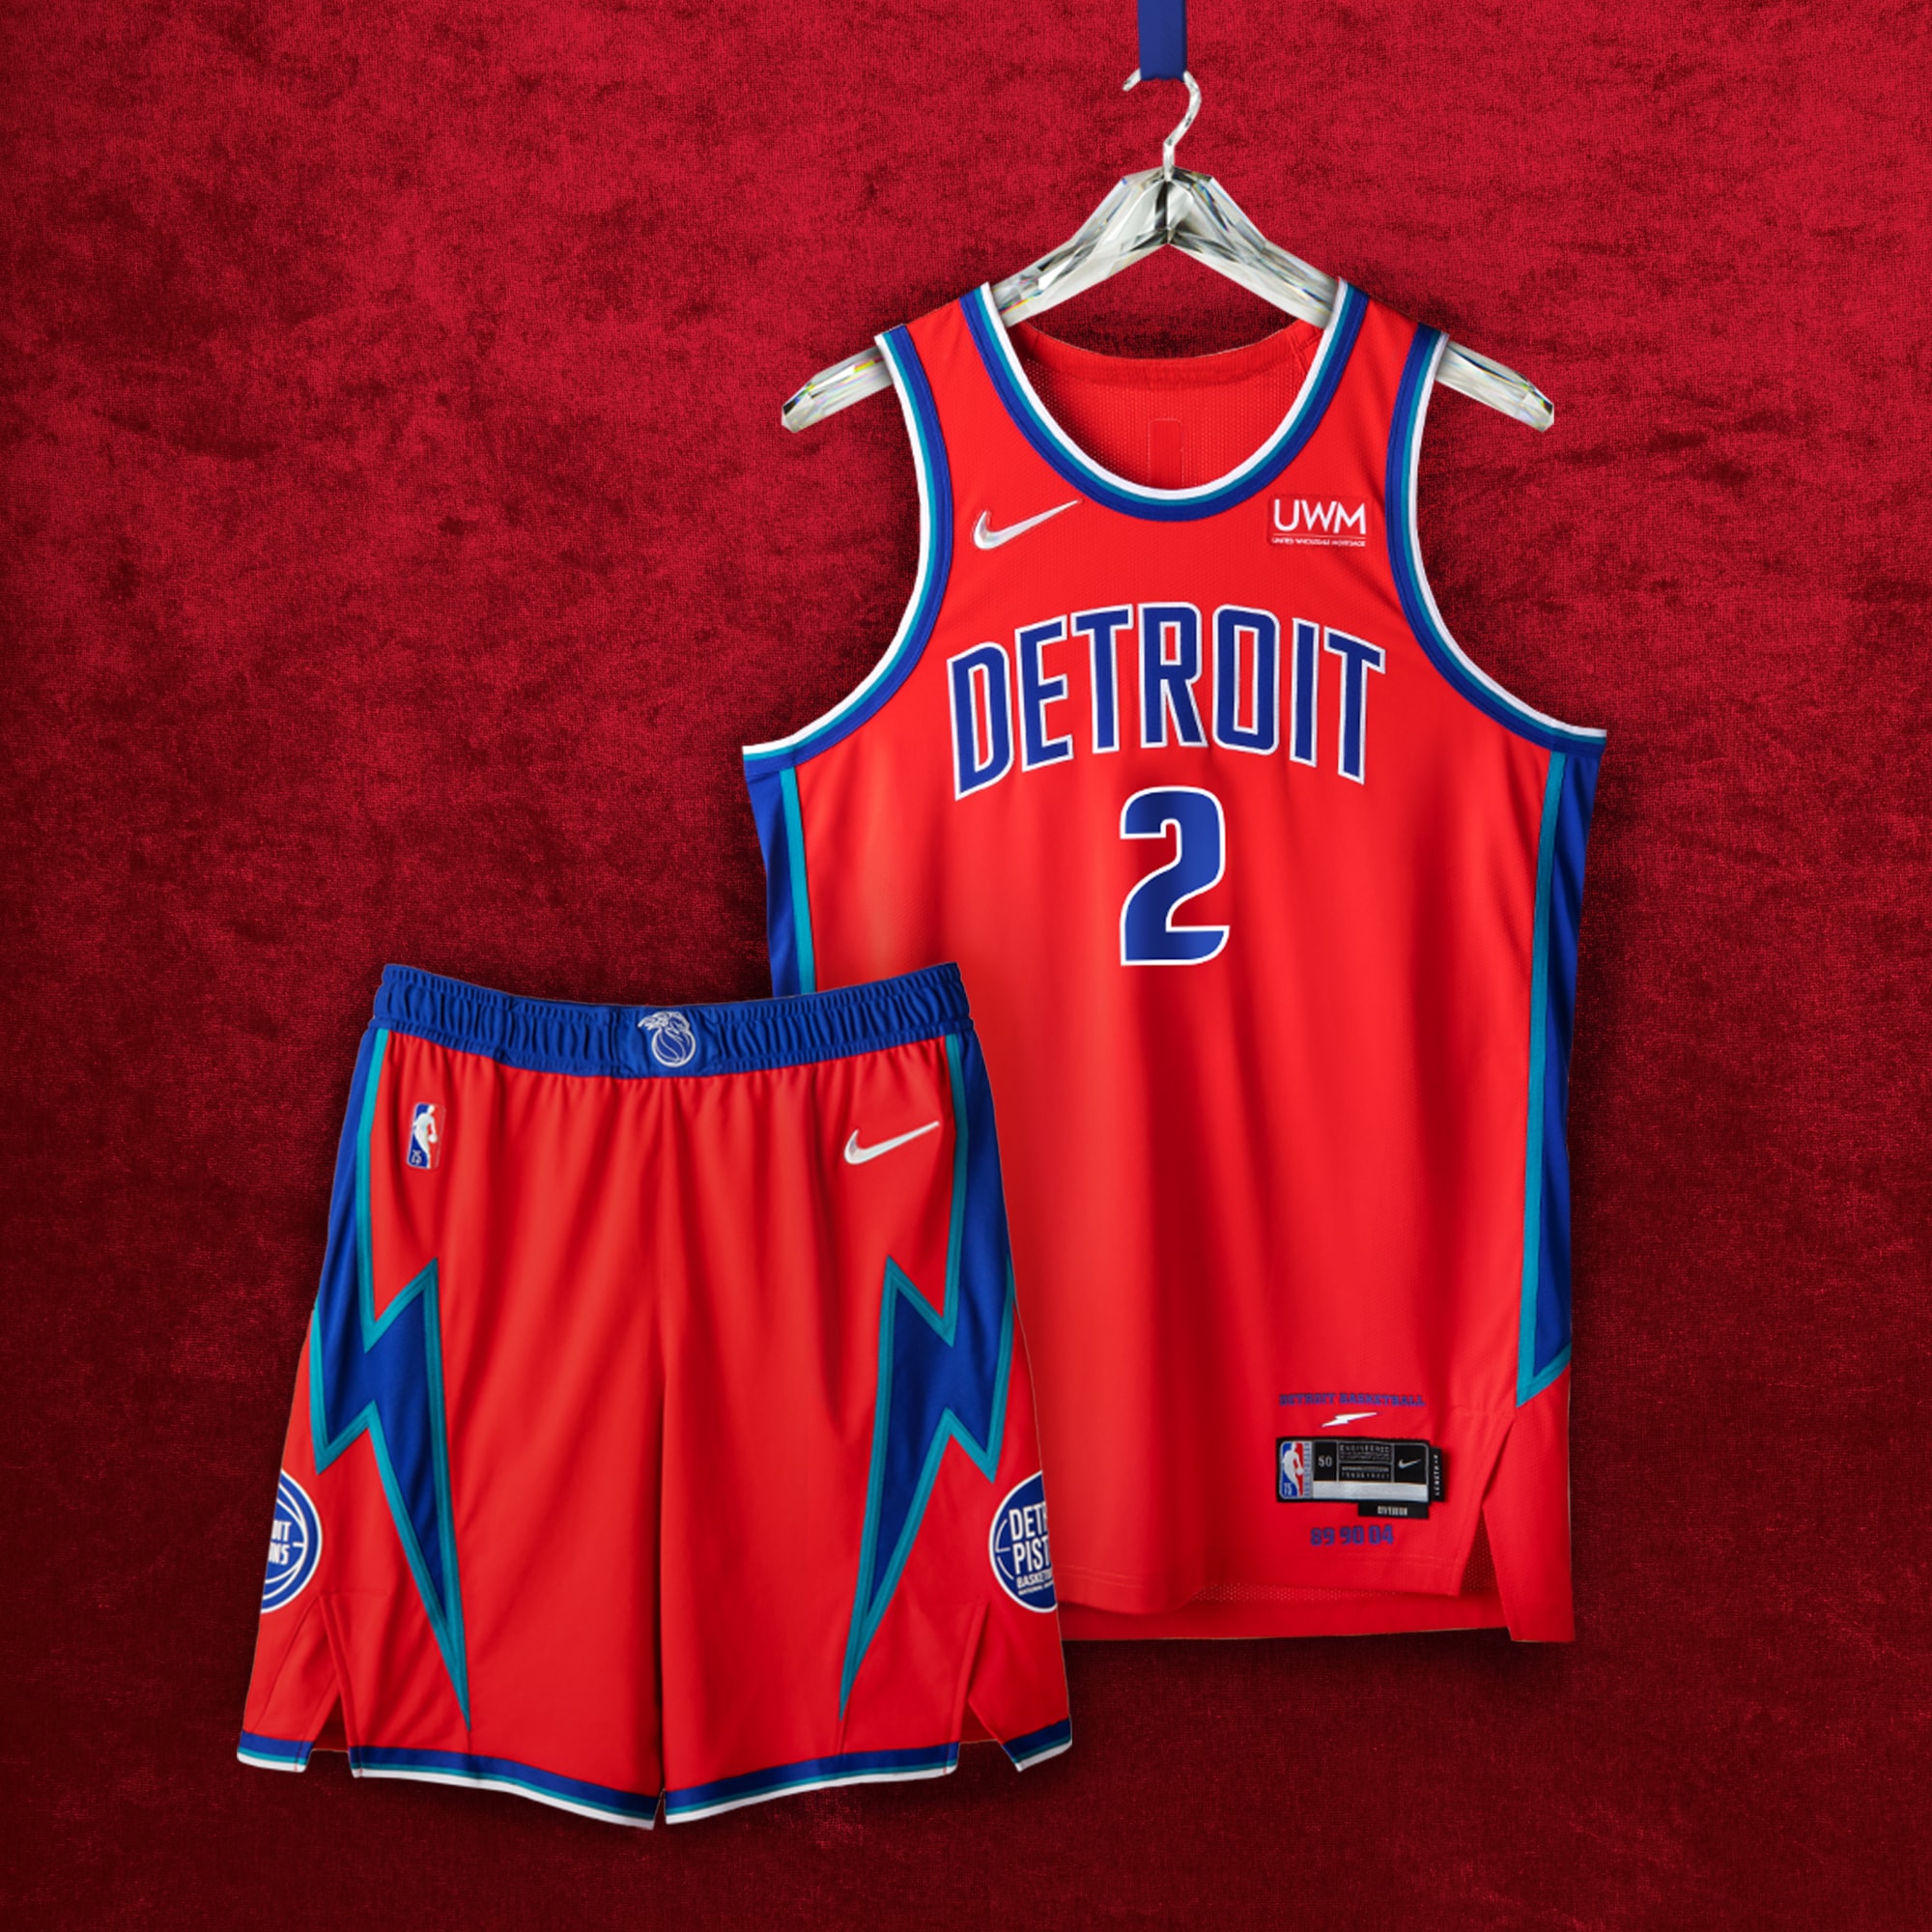 Detroit Pistons on X: CITY EDITION JERSEY GIVEAWAY TIME! RT & Reply w/  #DKGiveaway + follow @DKSportsbook to enter for a chance to win. Winner  selected & messaged on Wednesday, March 16.